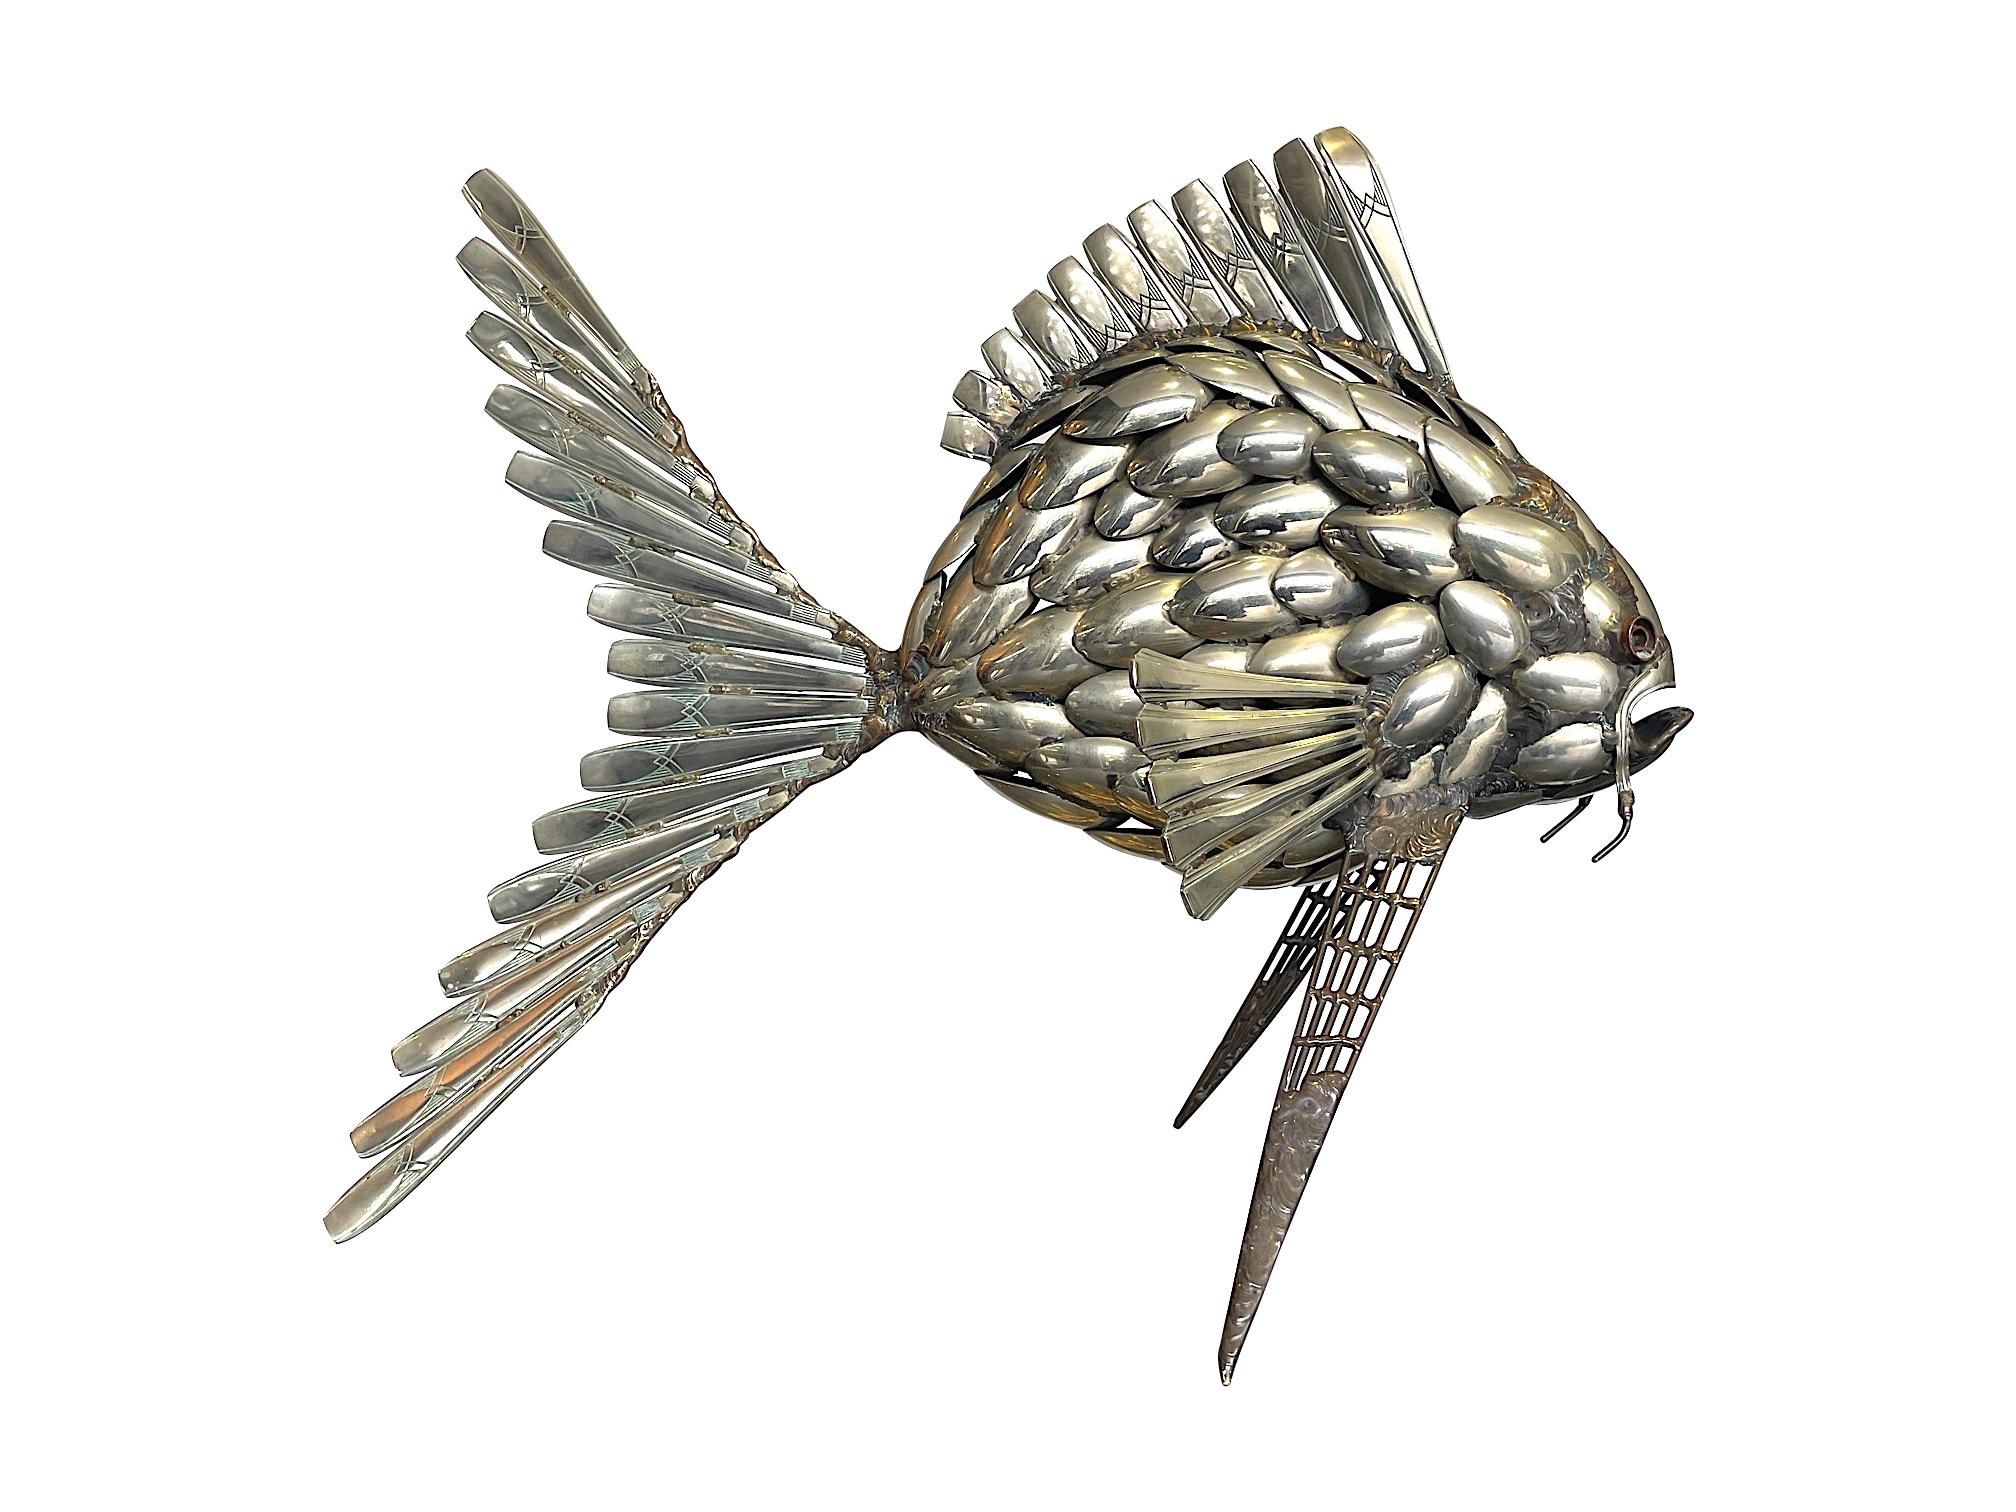 A fantastic large 1950s sculpture of a carp like fish made from silver plated spoons. The bowls of the spoons making up the scales and the handles making up the fins and other detail. The craftsmanship and detail is exceptional with each piece